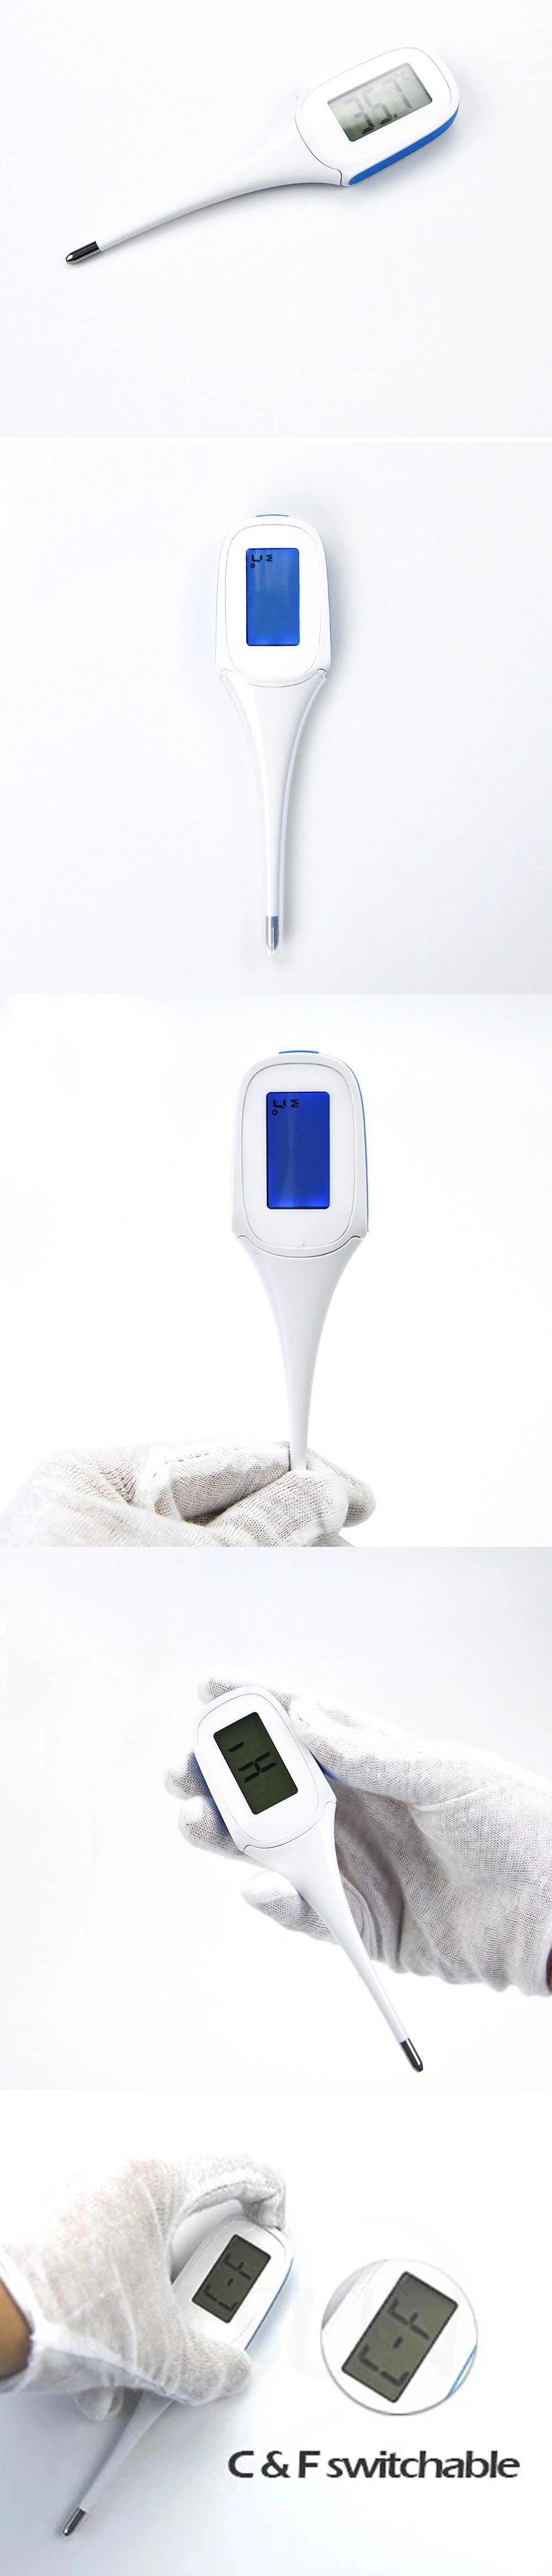 High Quality CE FDA Approved Digital Professional Medical Instrument Temperature Gun Electronic IR Infrared Thermometer Forehead Non-Contact Thermometer